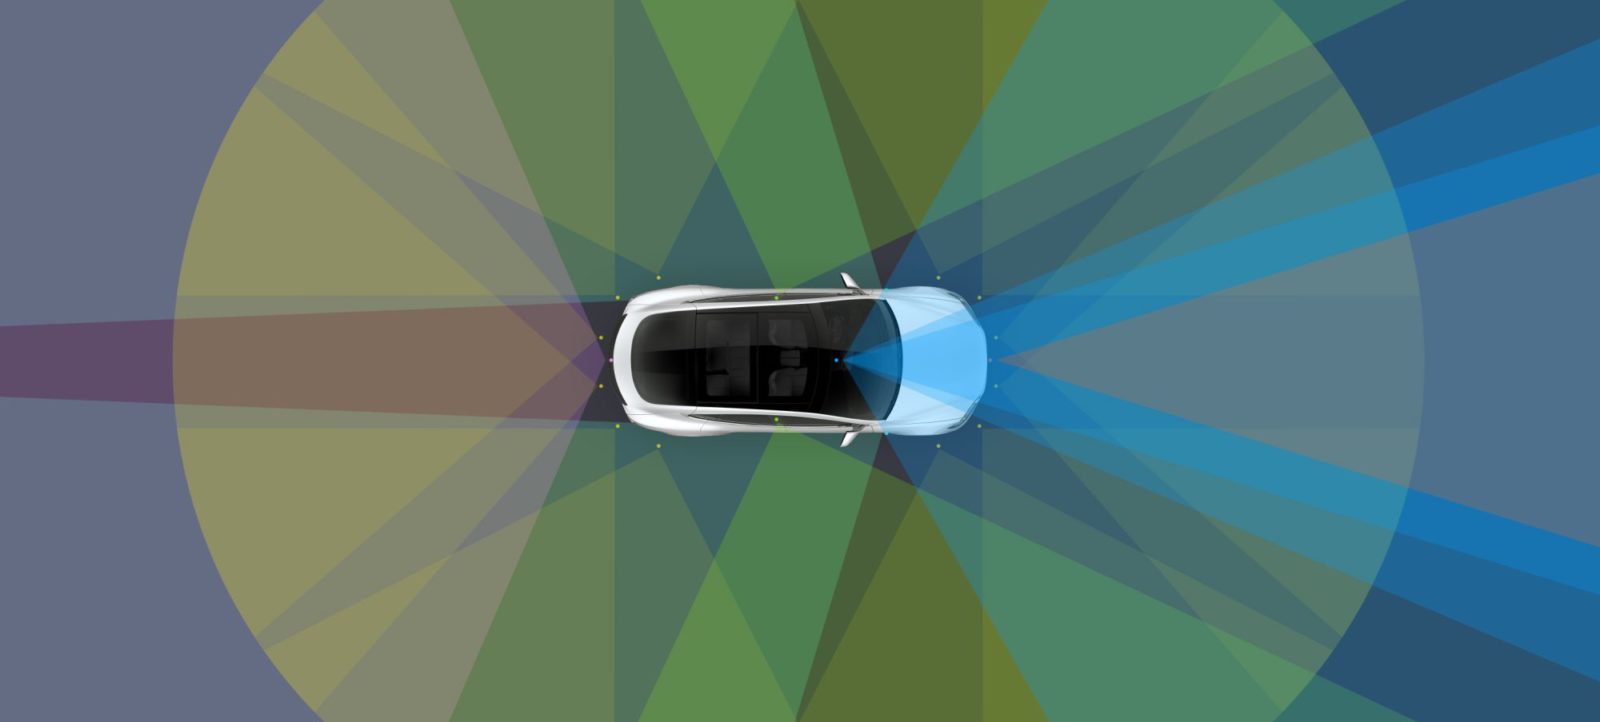 All Tesla Cars Being Produced Now Have Full Self-Driving Hardware